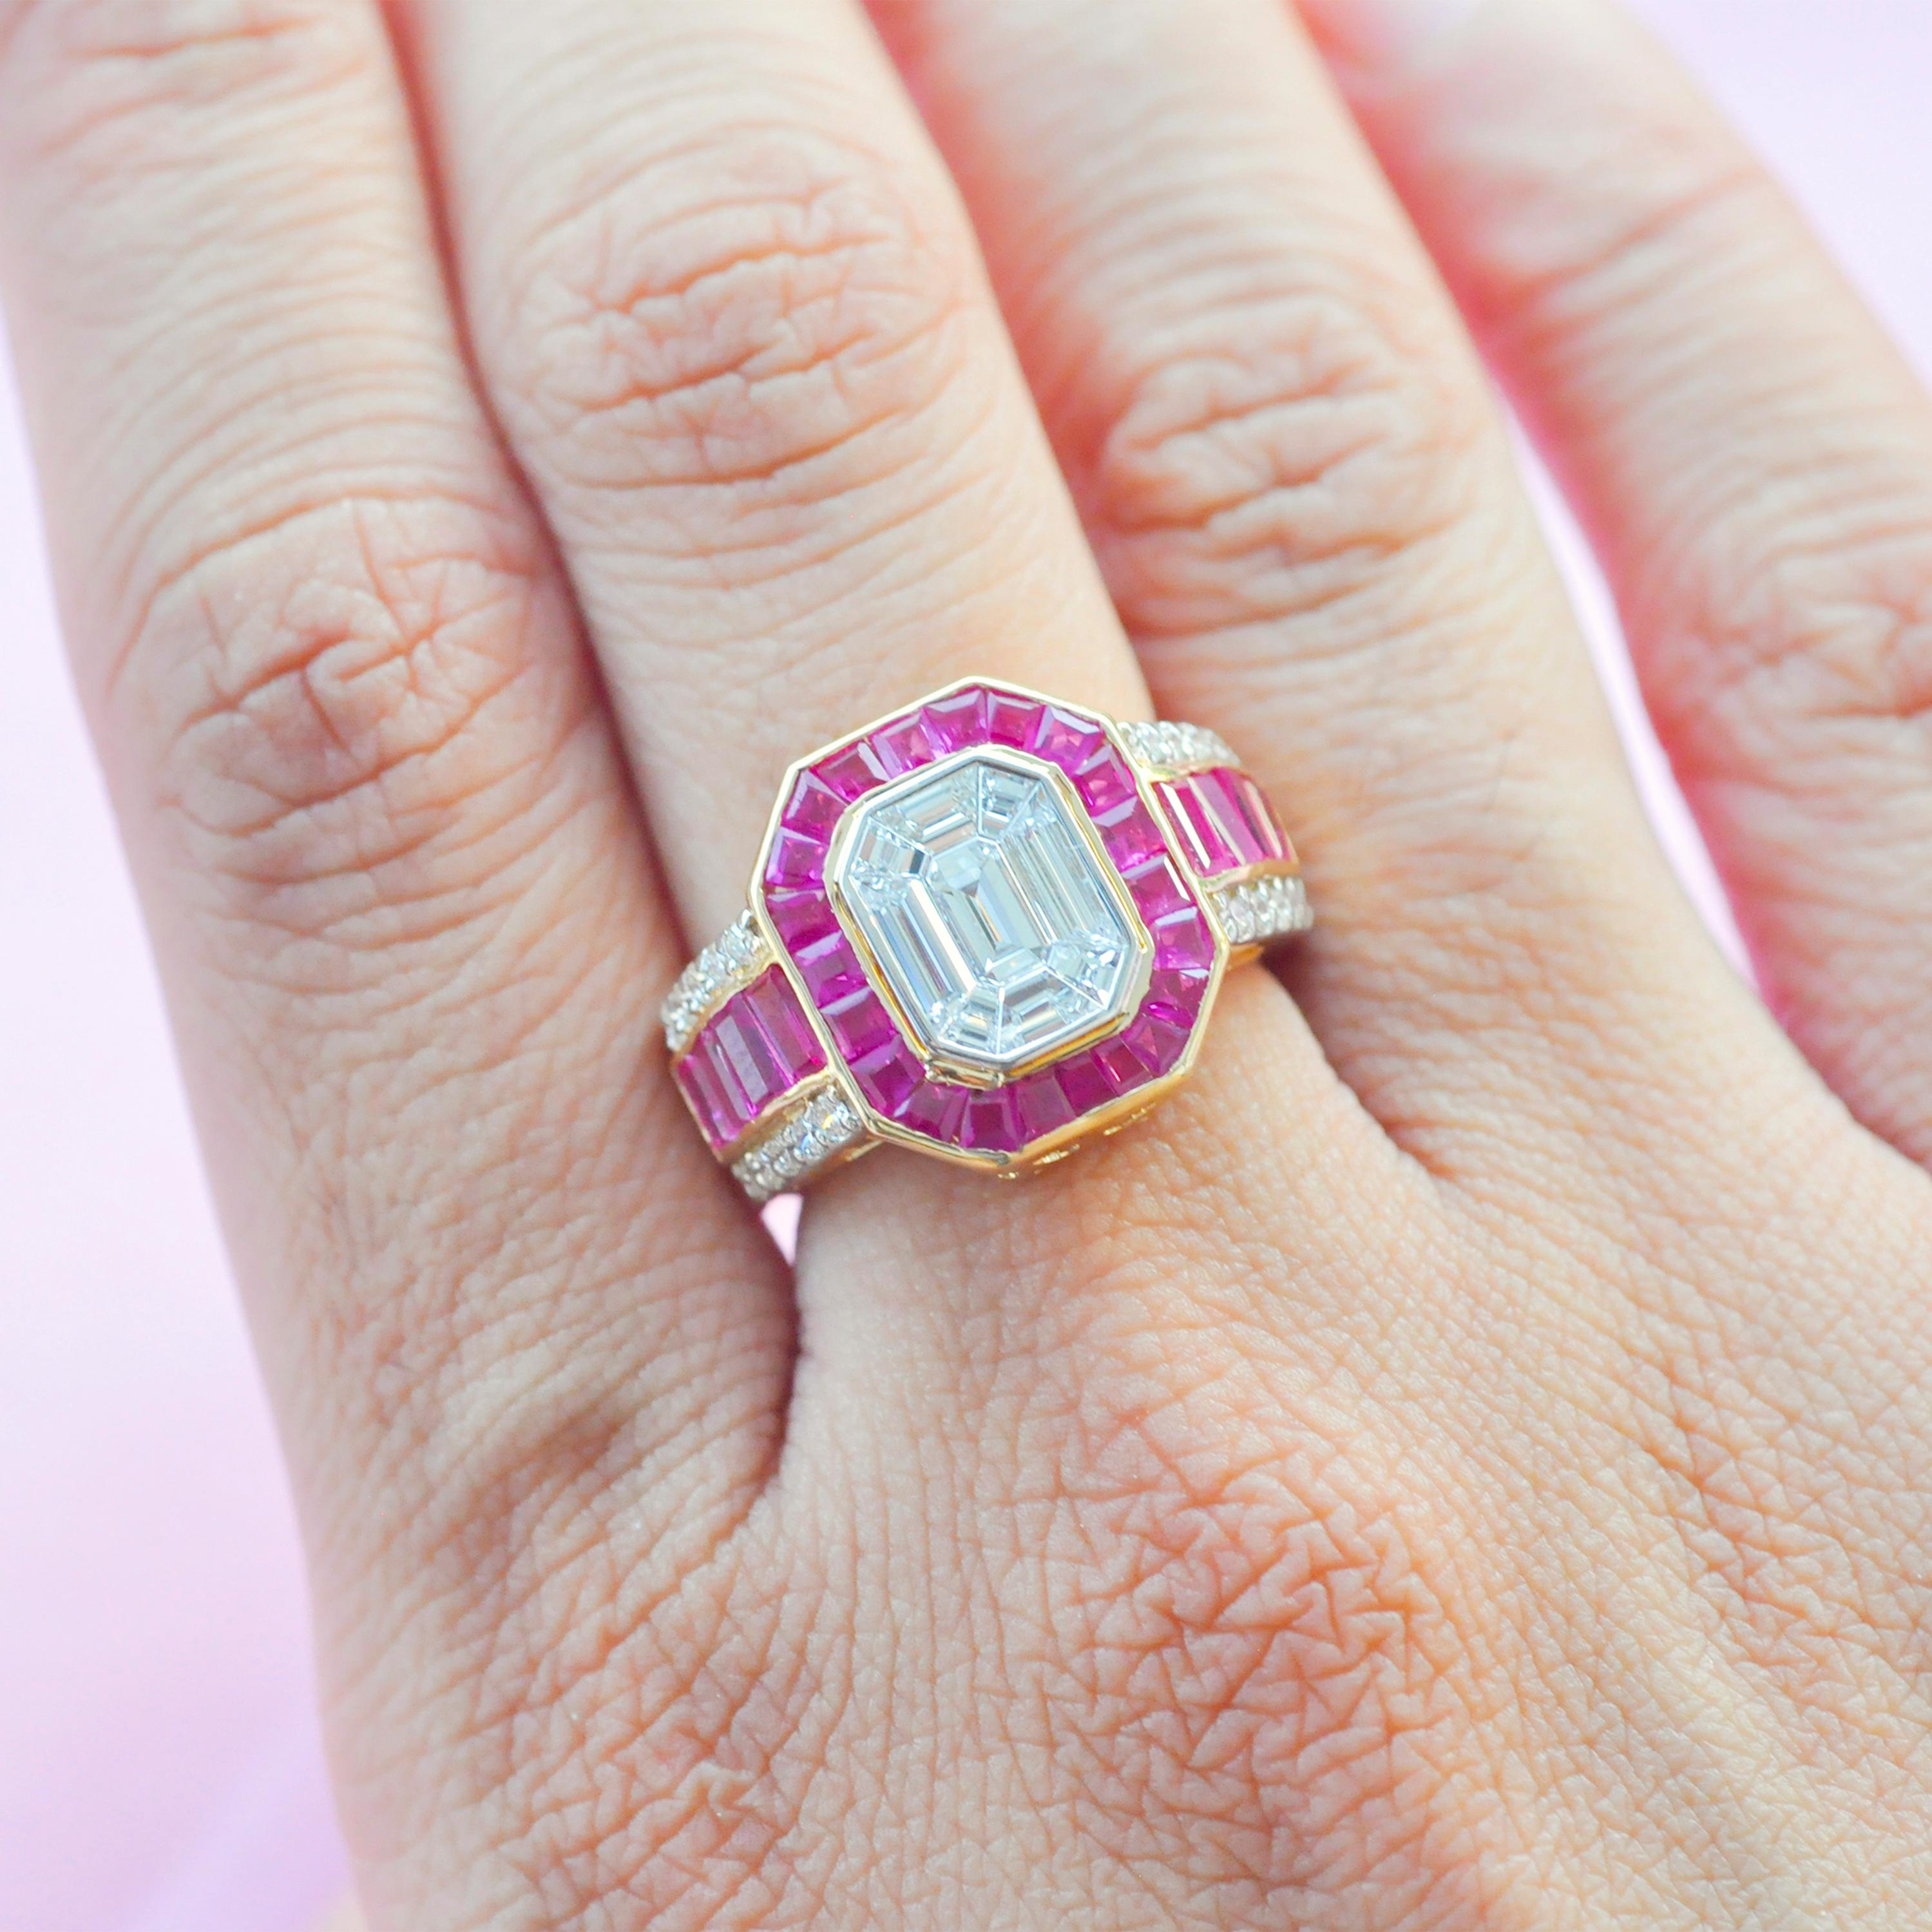 Art deco style inspired emerald cut octagon diamond ruby contemporary engagement ring in 18 karat gold

As we all know, art deco is characterised by geometric shapes. Inspired by art deco and giving it a contemporary make over is this diamond ruby